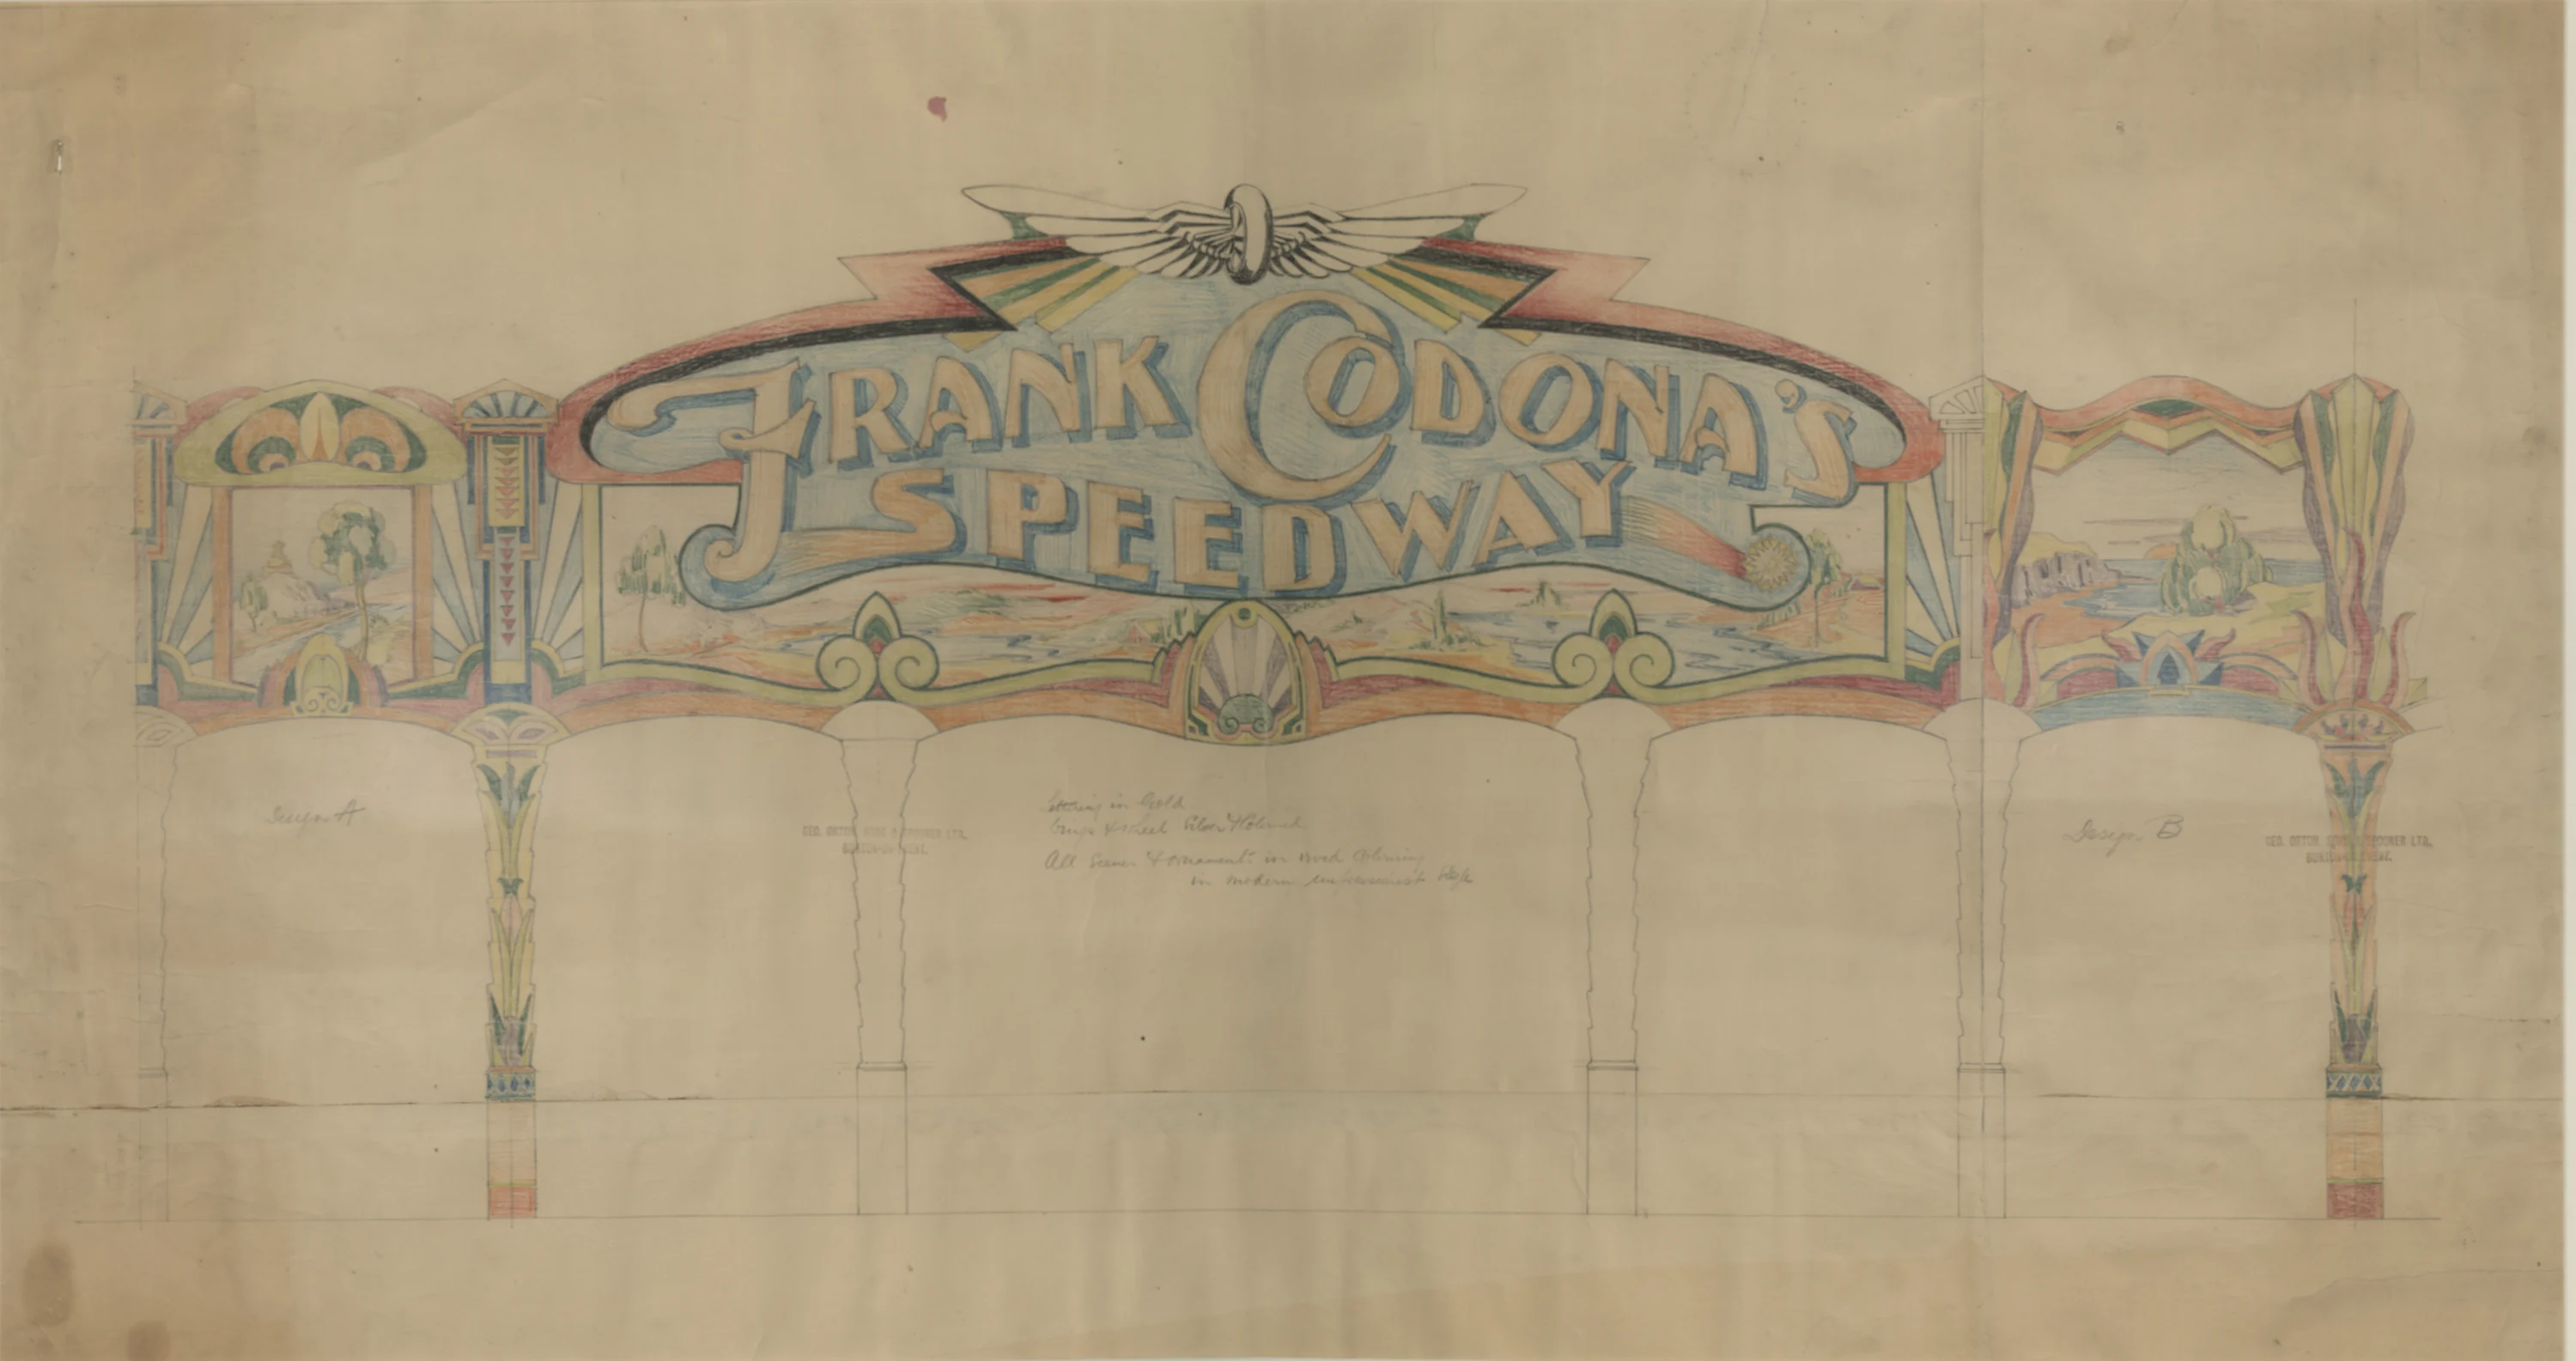 Color drawing of ride frontage containing landscape scenes and Egyptian inspired columns. Stamped Geo. Orton, Sons & Spooner, Burton-on-Trent. Contains notes about decorative finishes.³